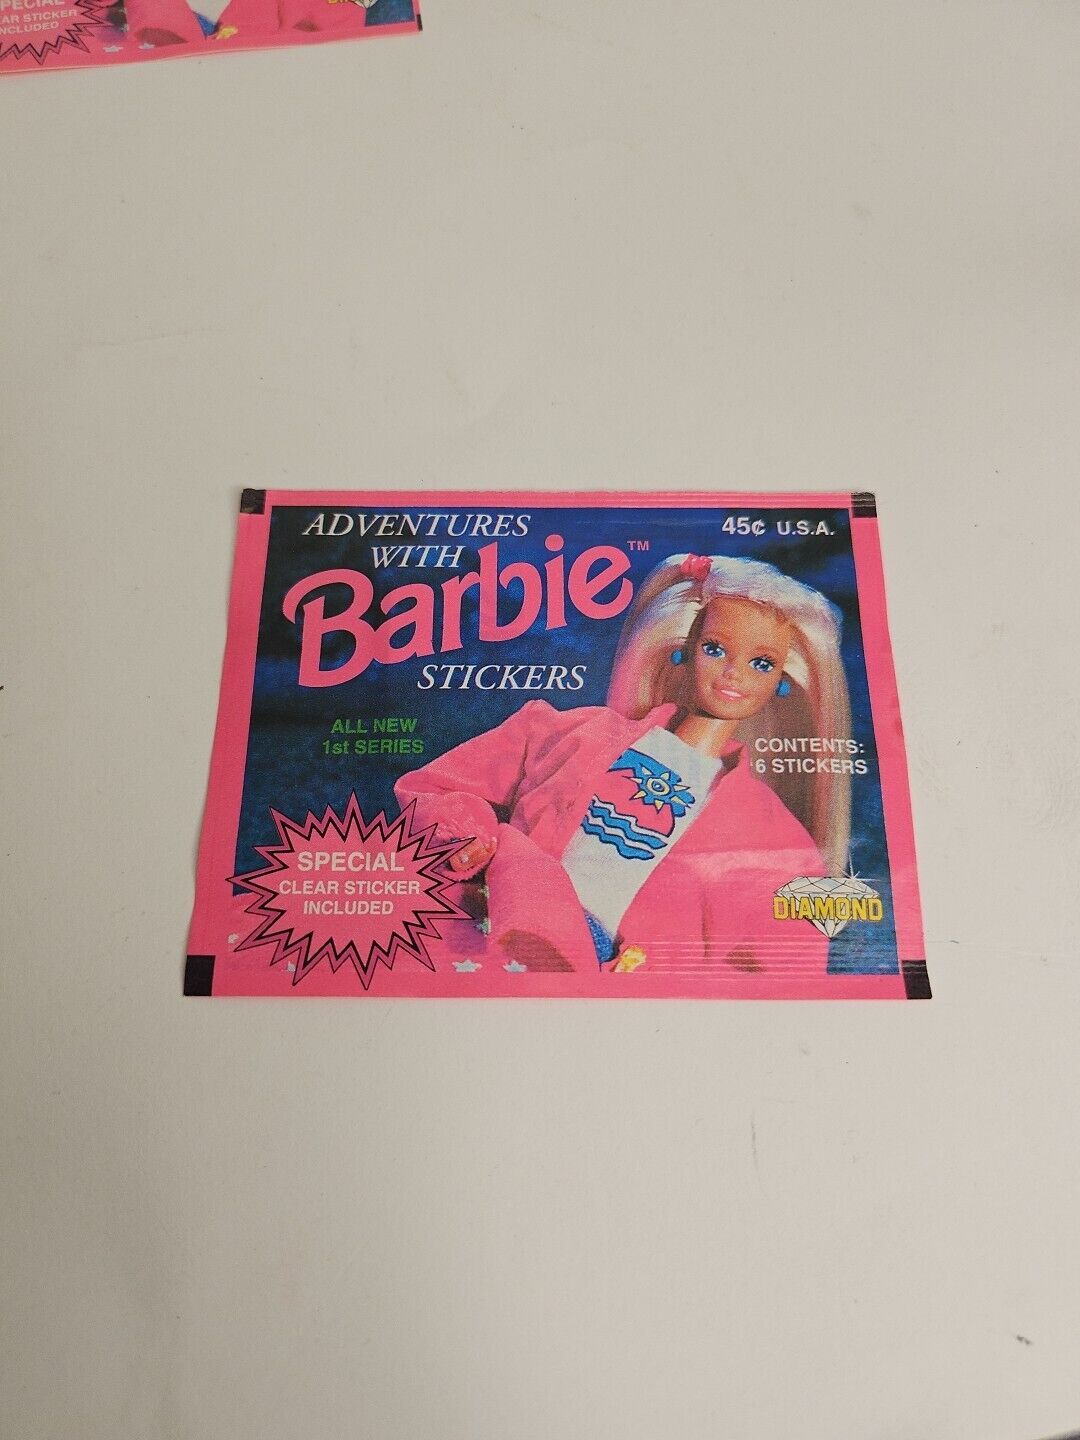 RARE Package Of 6 Barbie Stickers - 1st Series  Vintage 1994